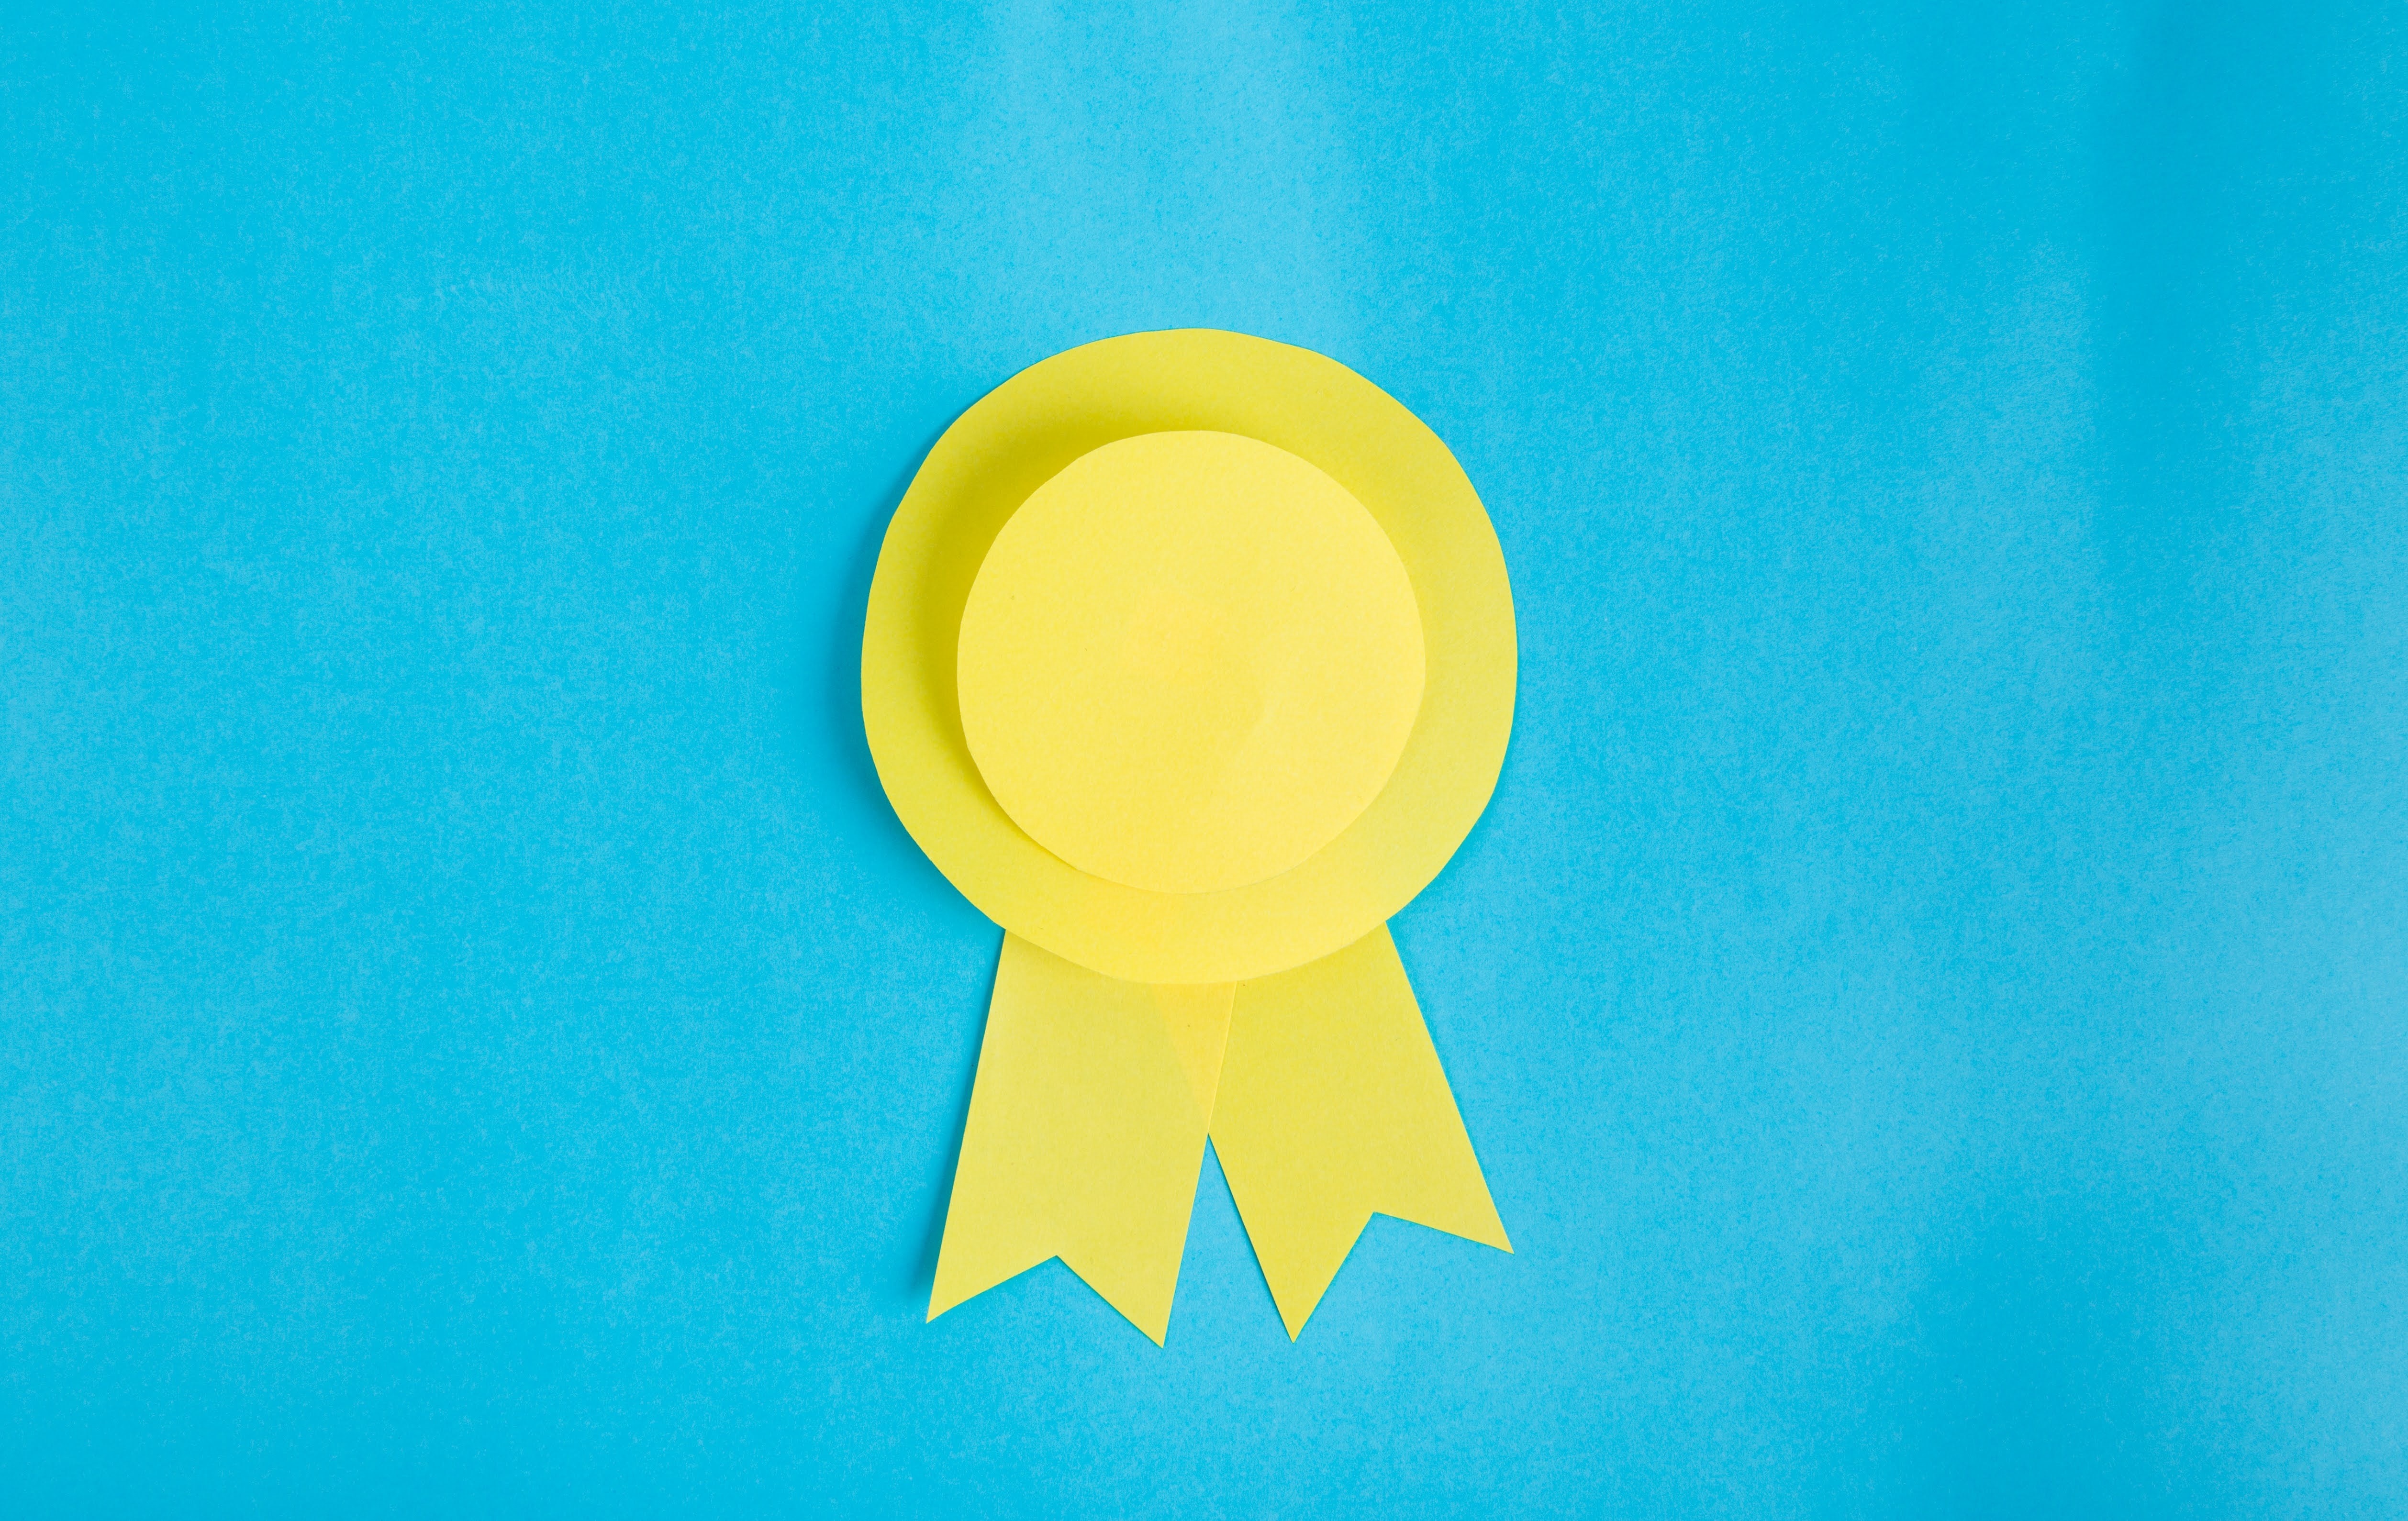 Featured image: A rosette for success. - Read full post: Fitzrovia IT Named One of the Best Small Companies to Work For!